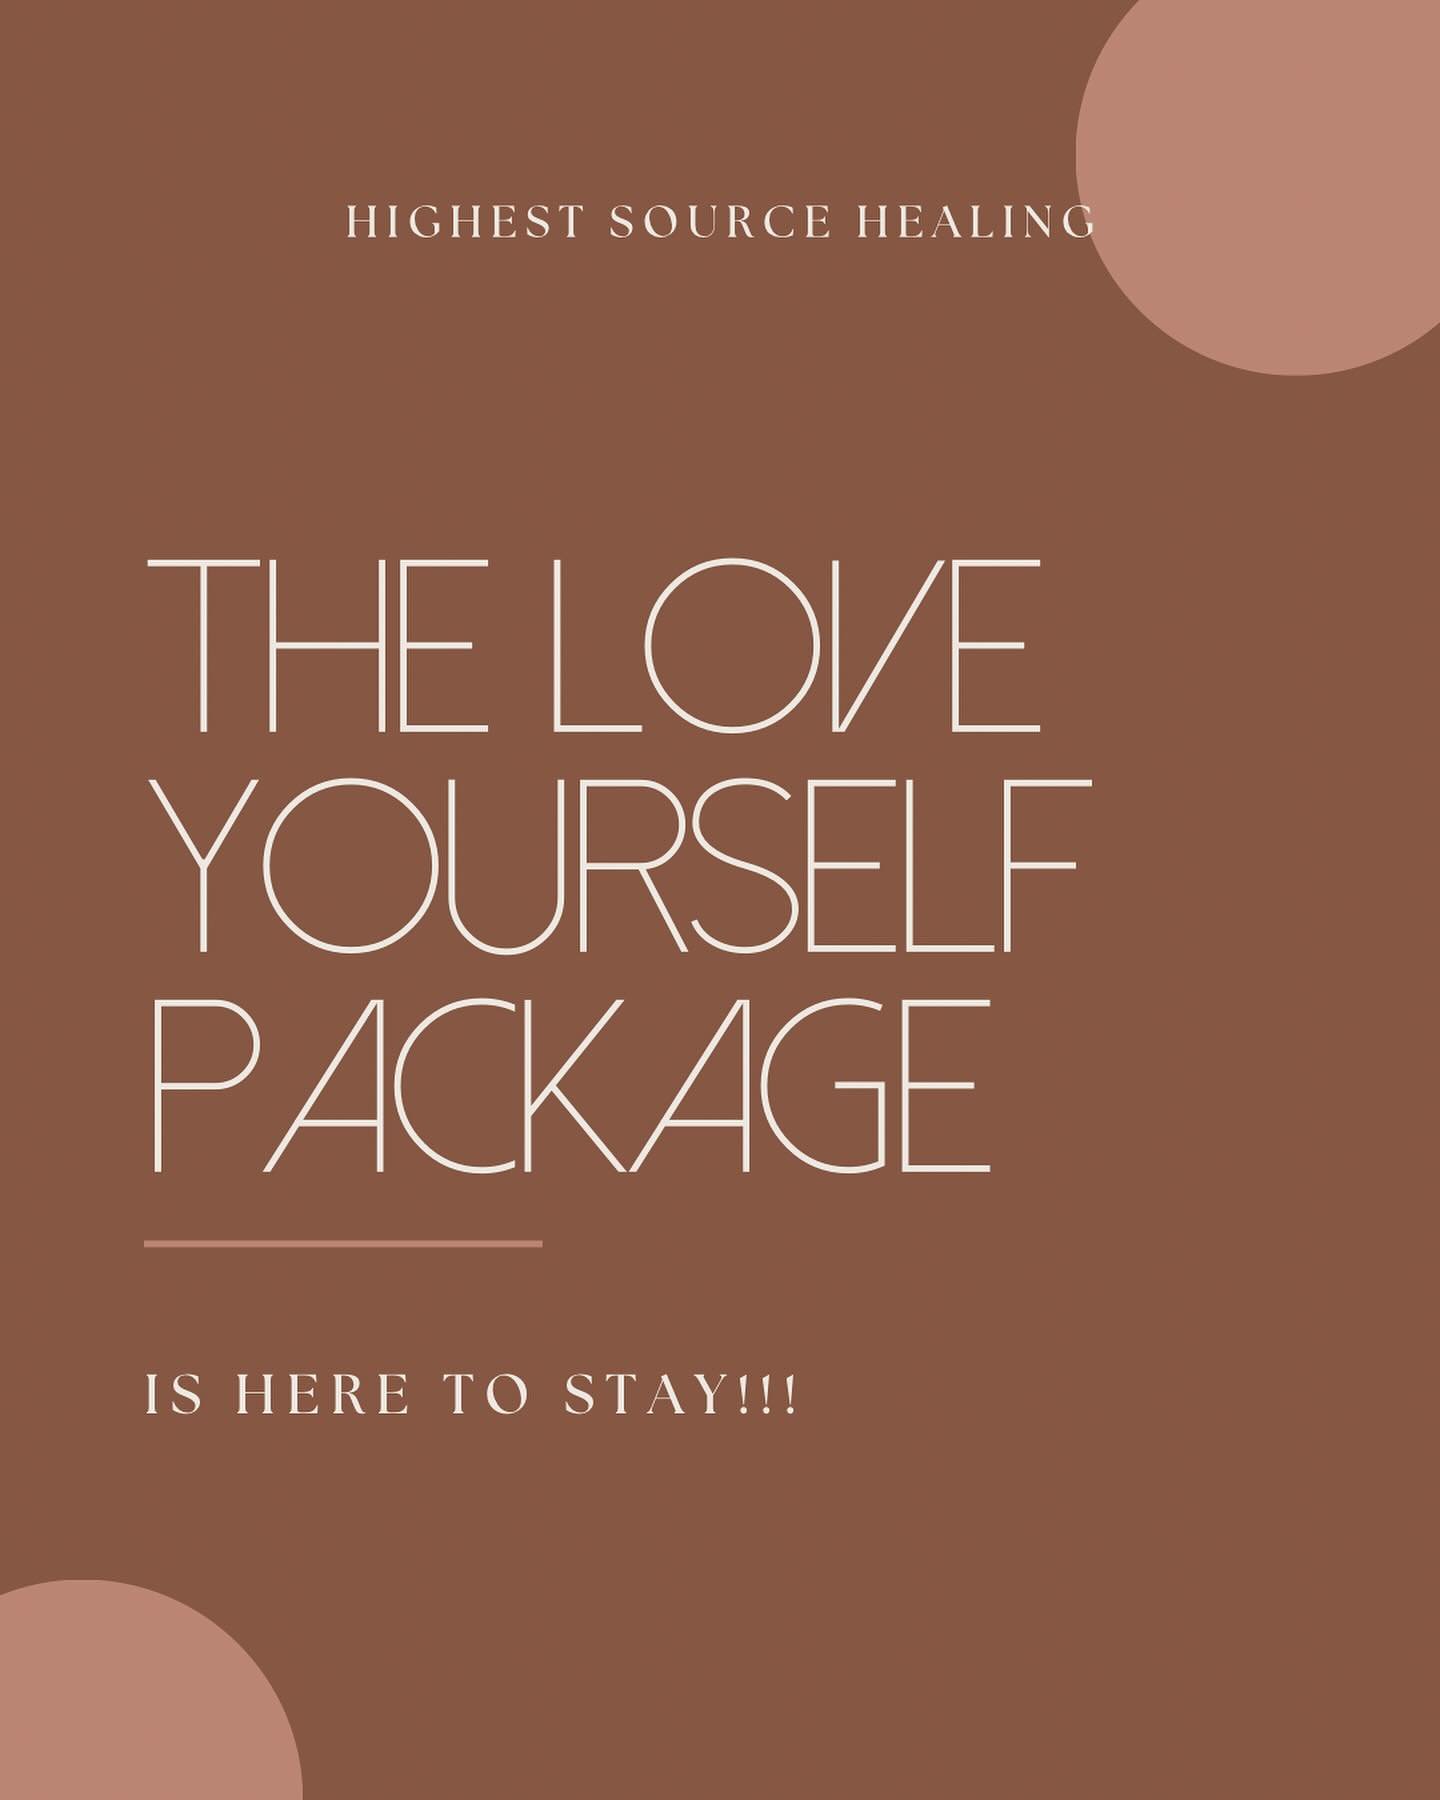 Self-love whispers, &lsquo;You are worthy,&rsquo; even when the world shouts otherwise.&rdquo; 💕

The Love Yourself Package is the perfect way to treat yourself any time of the year! 

It includes:
A Community Breathwork Sister Circle
AND 
A 1:1 Pri